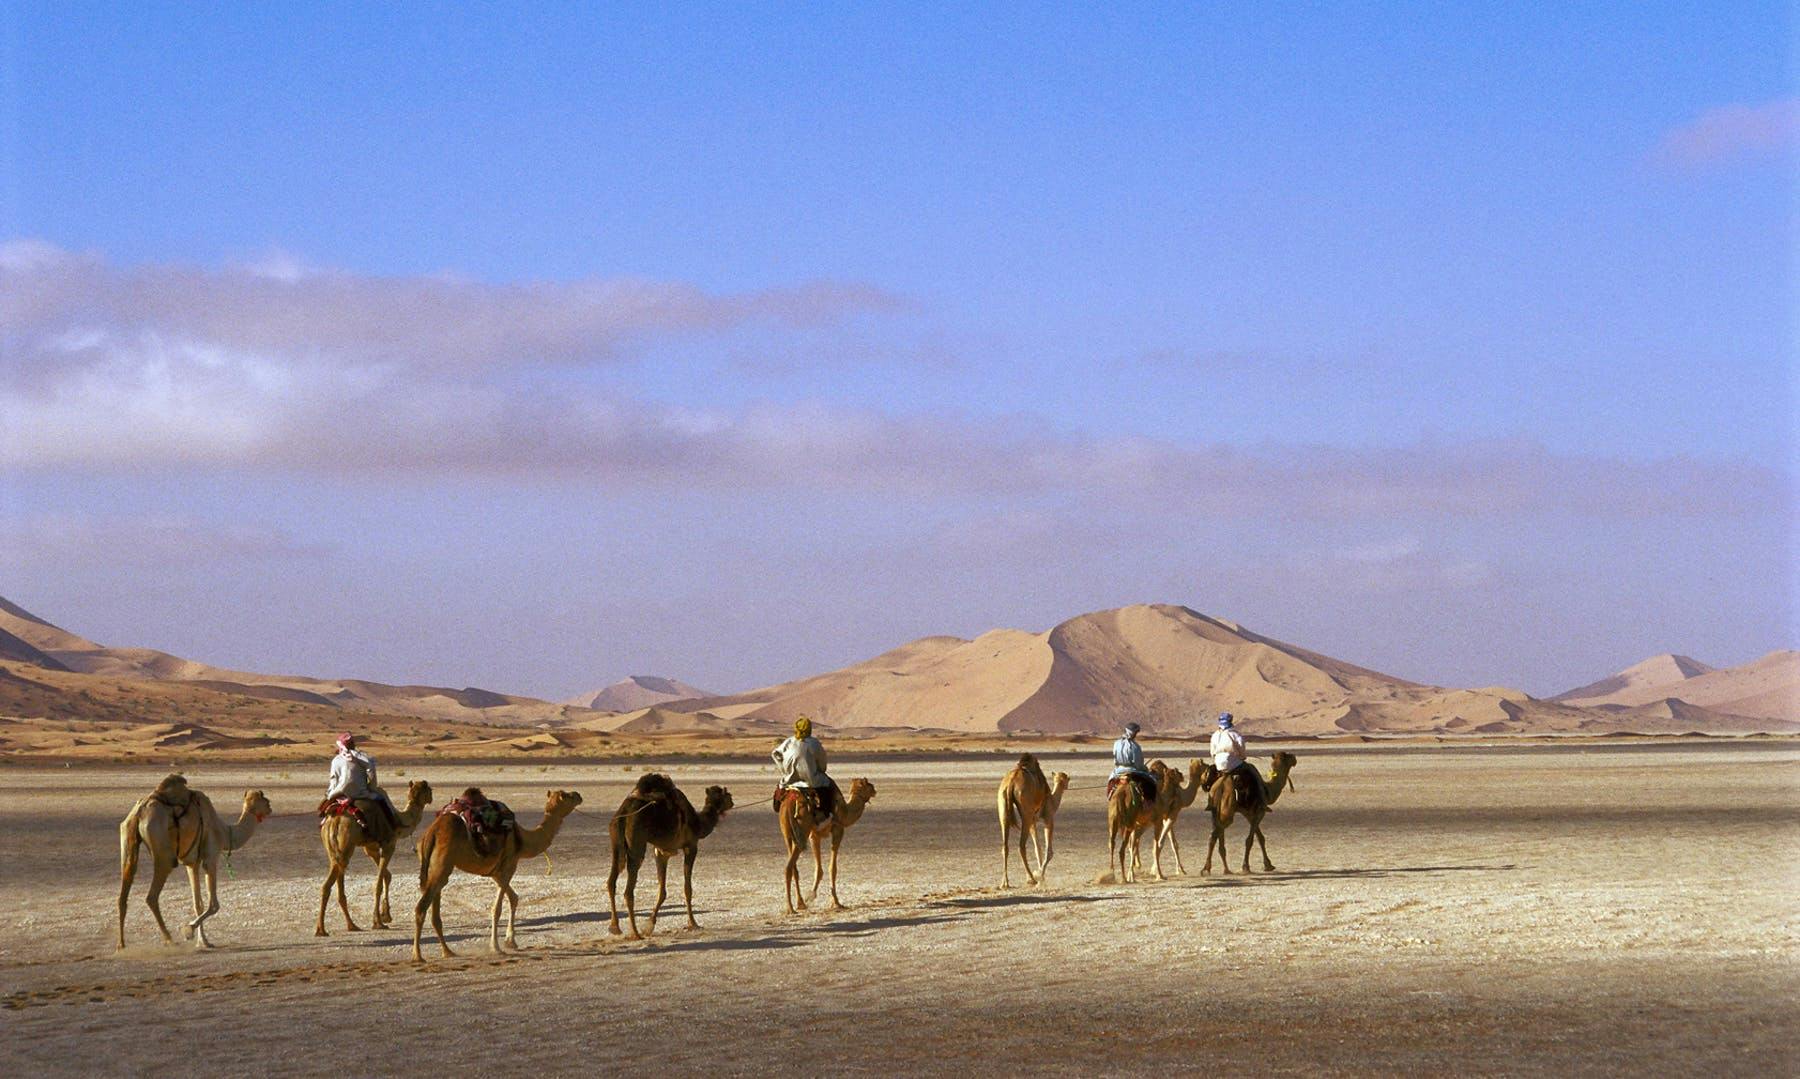 Line of camels carrying people in a desert landscape